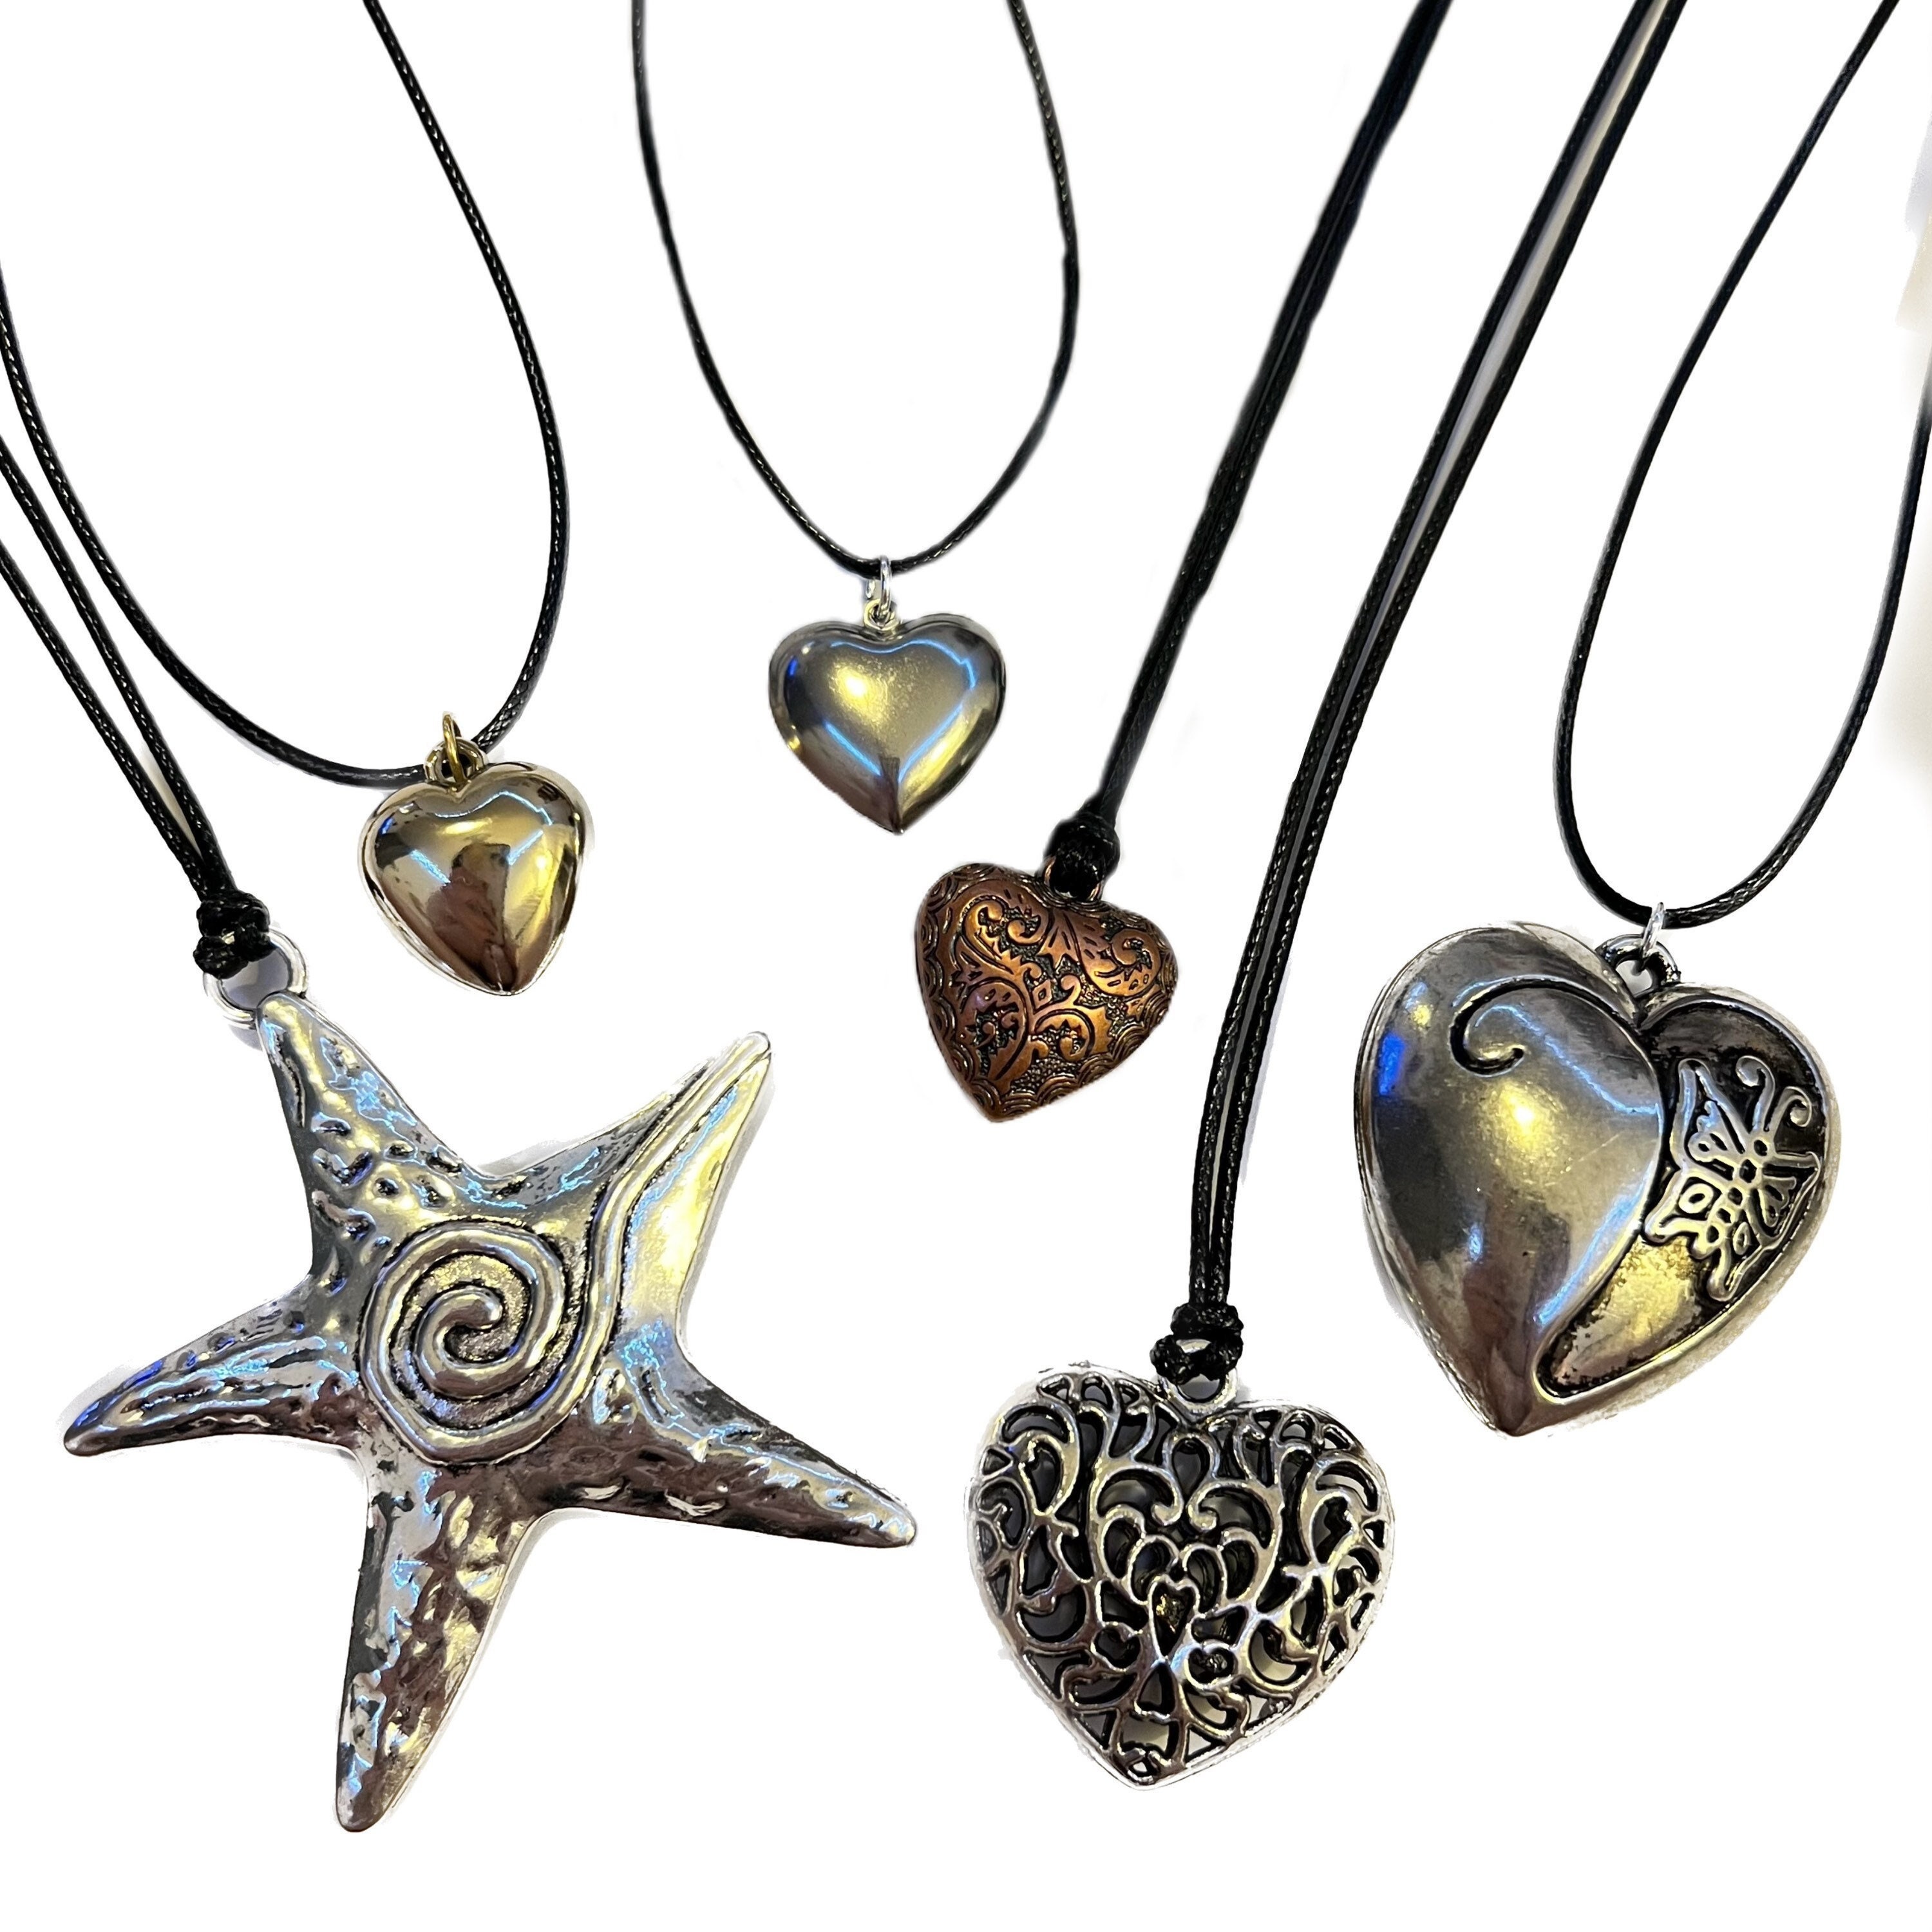 Pouring Your Heart Out Puffy Heart Mold - Starfish Pendants! Wow